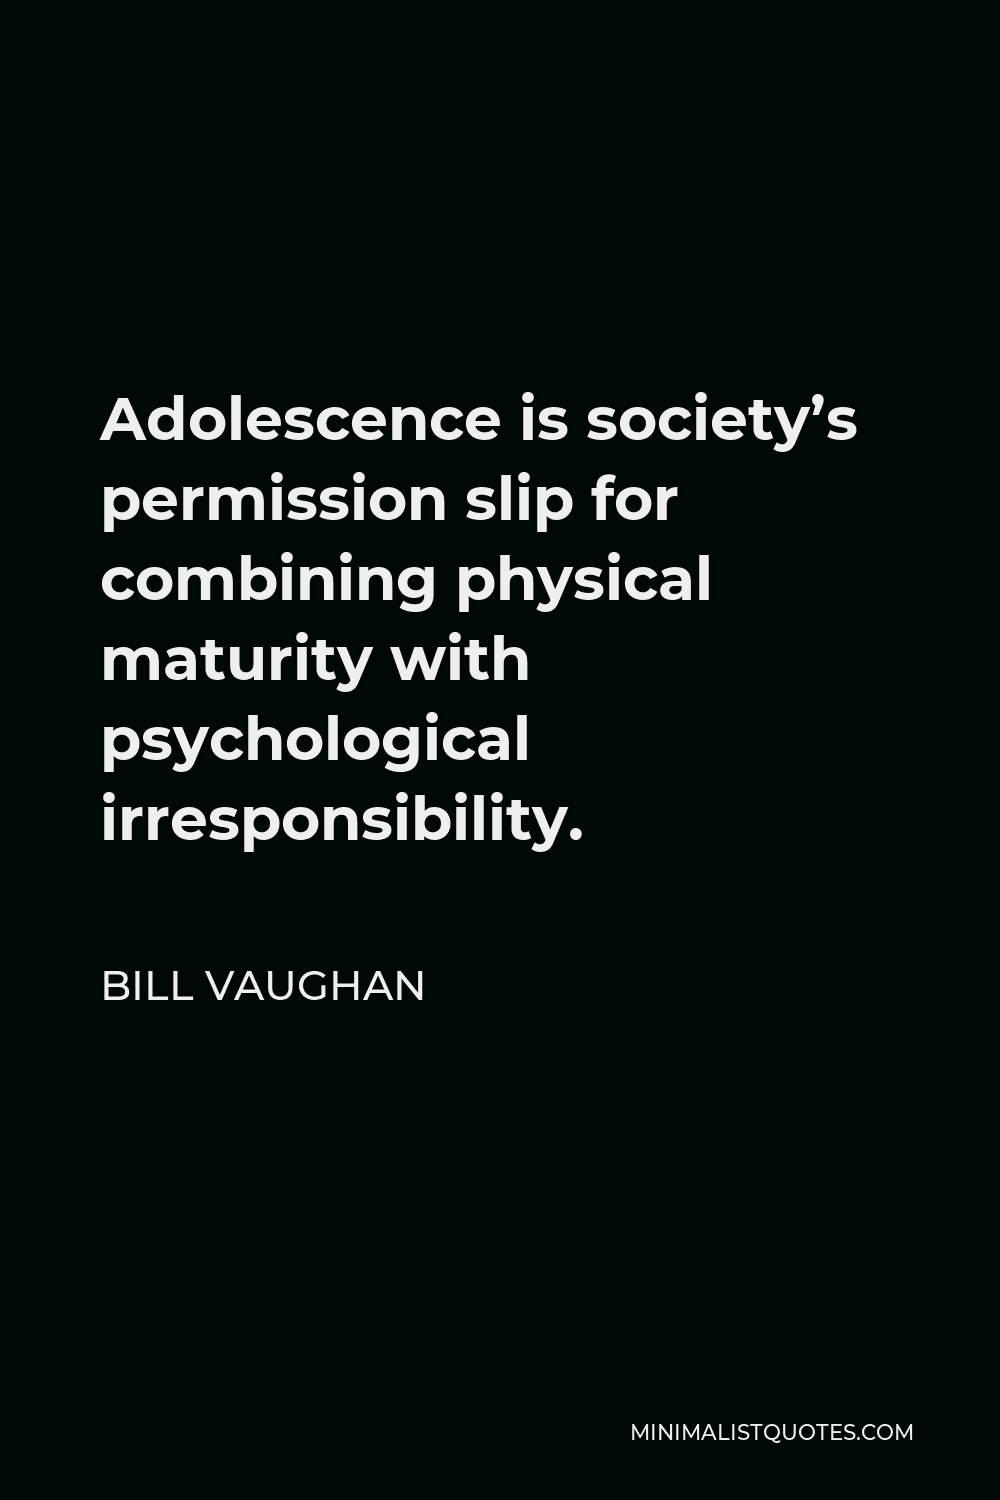 Bill Vaughan Quote - Adolescence is society’s permission slip for combining physical maturity with psychological irresponsibility.